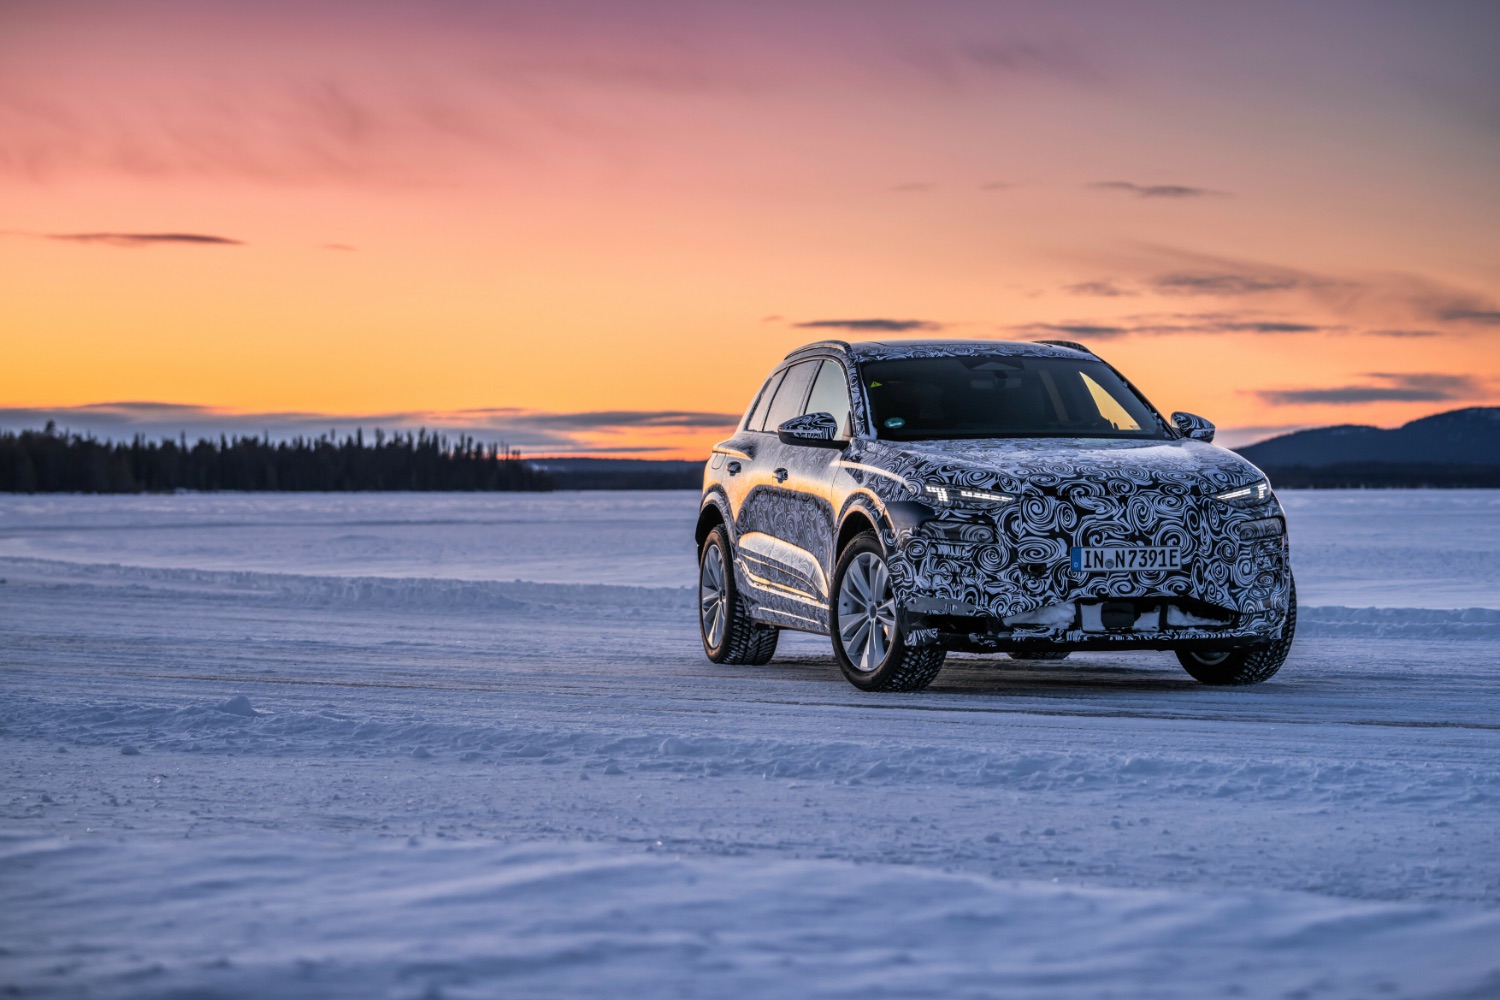 Car News | First look at new electric Audi Q6 e-tron | CompleteCar.ie